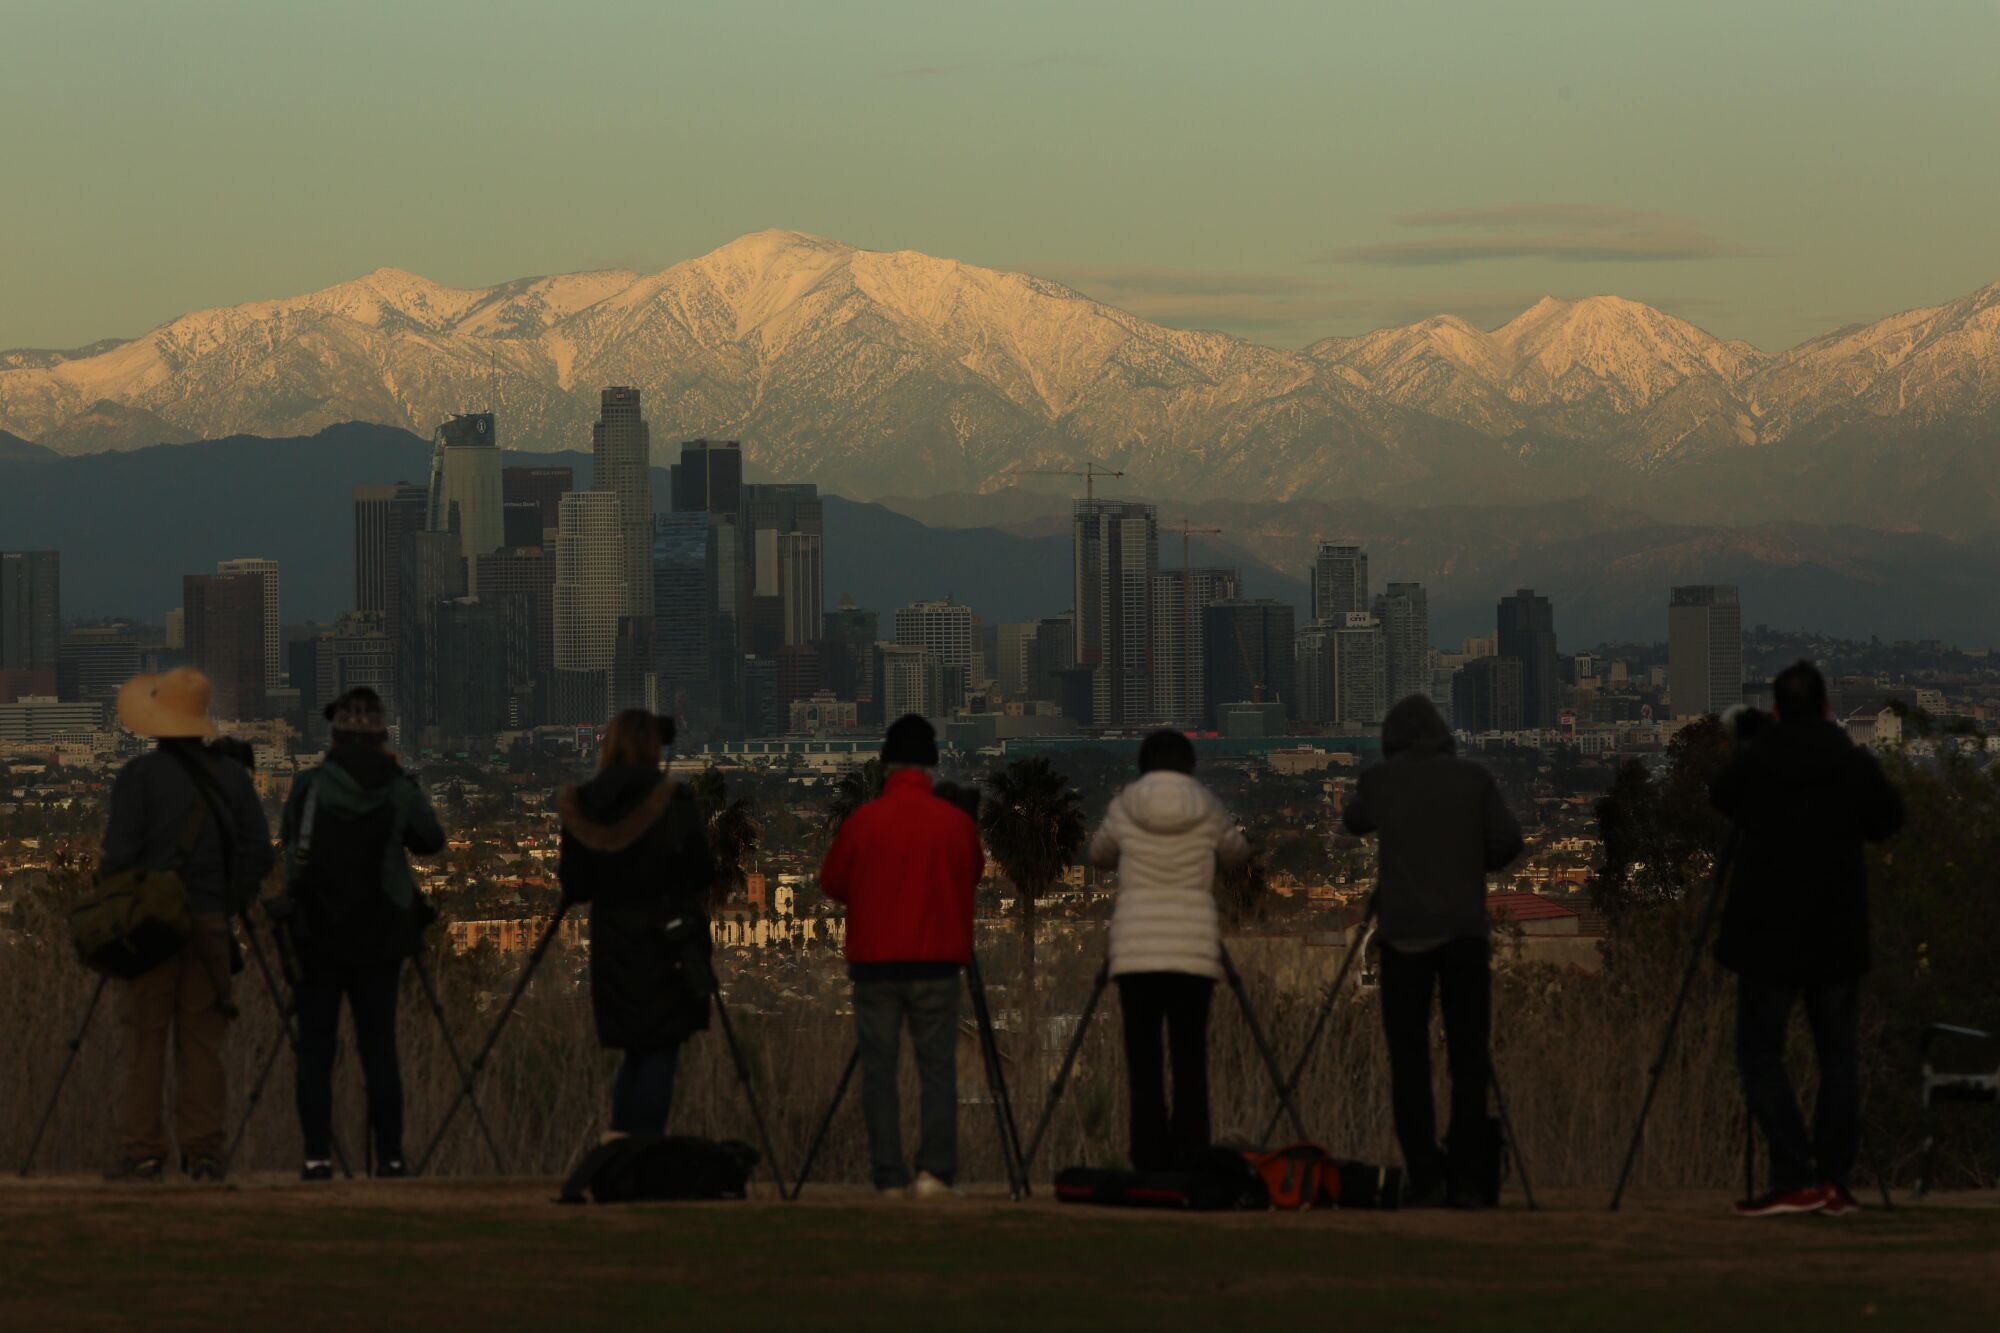 Photographers line up to photograph the snow capped San Gabriel mountains and the Los Angeles skyline